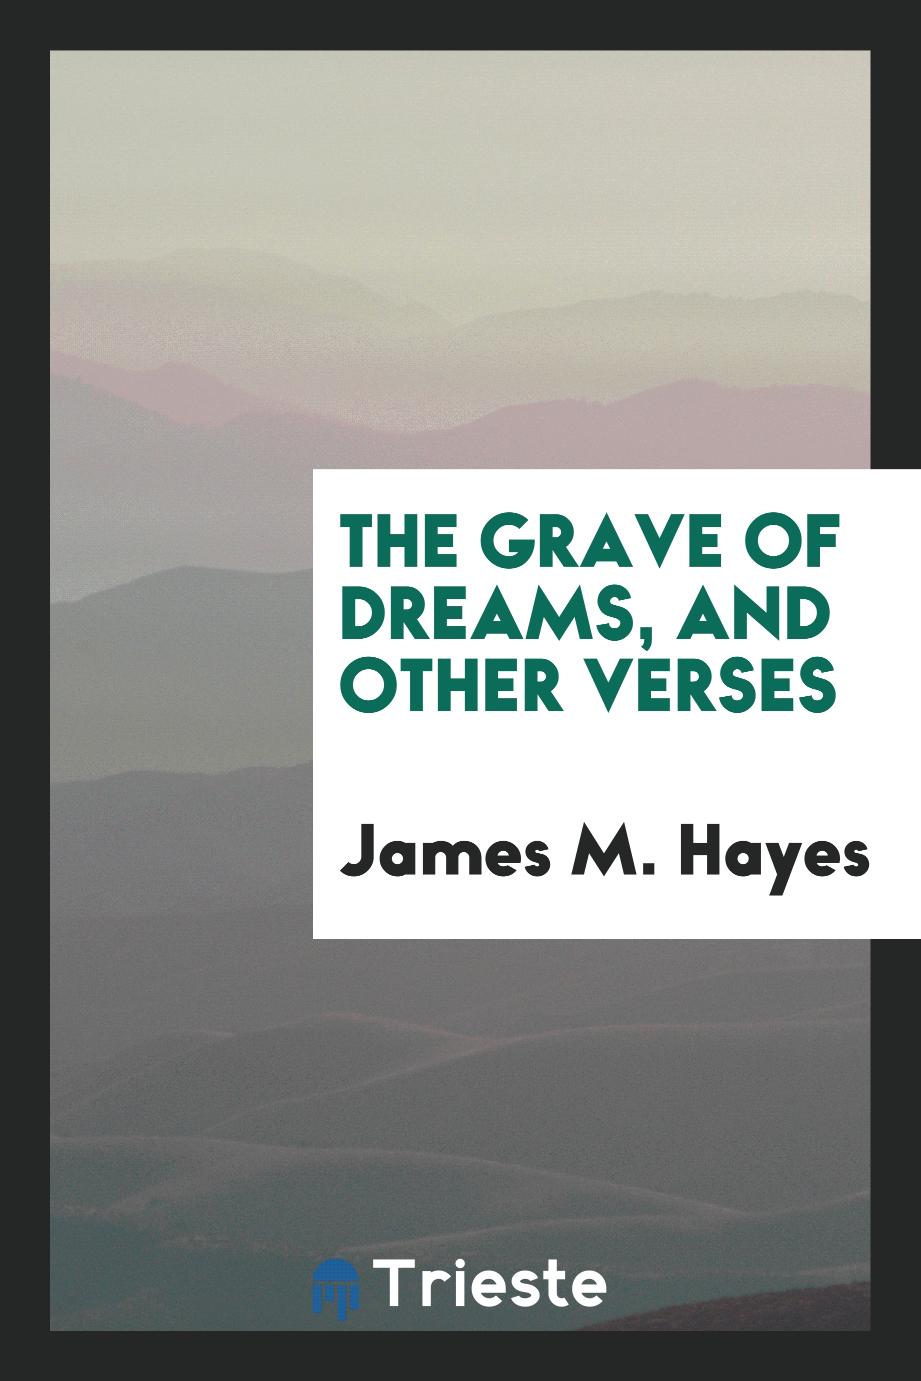 The grave of dreams, and other verses